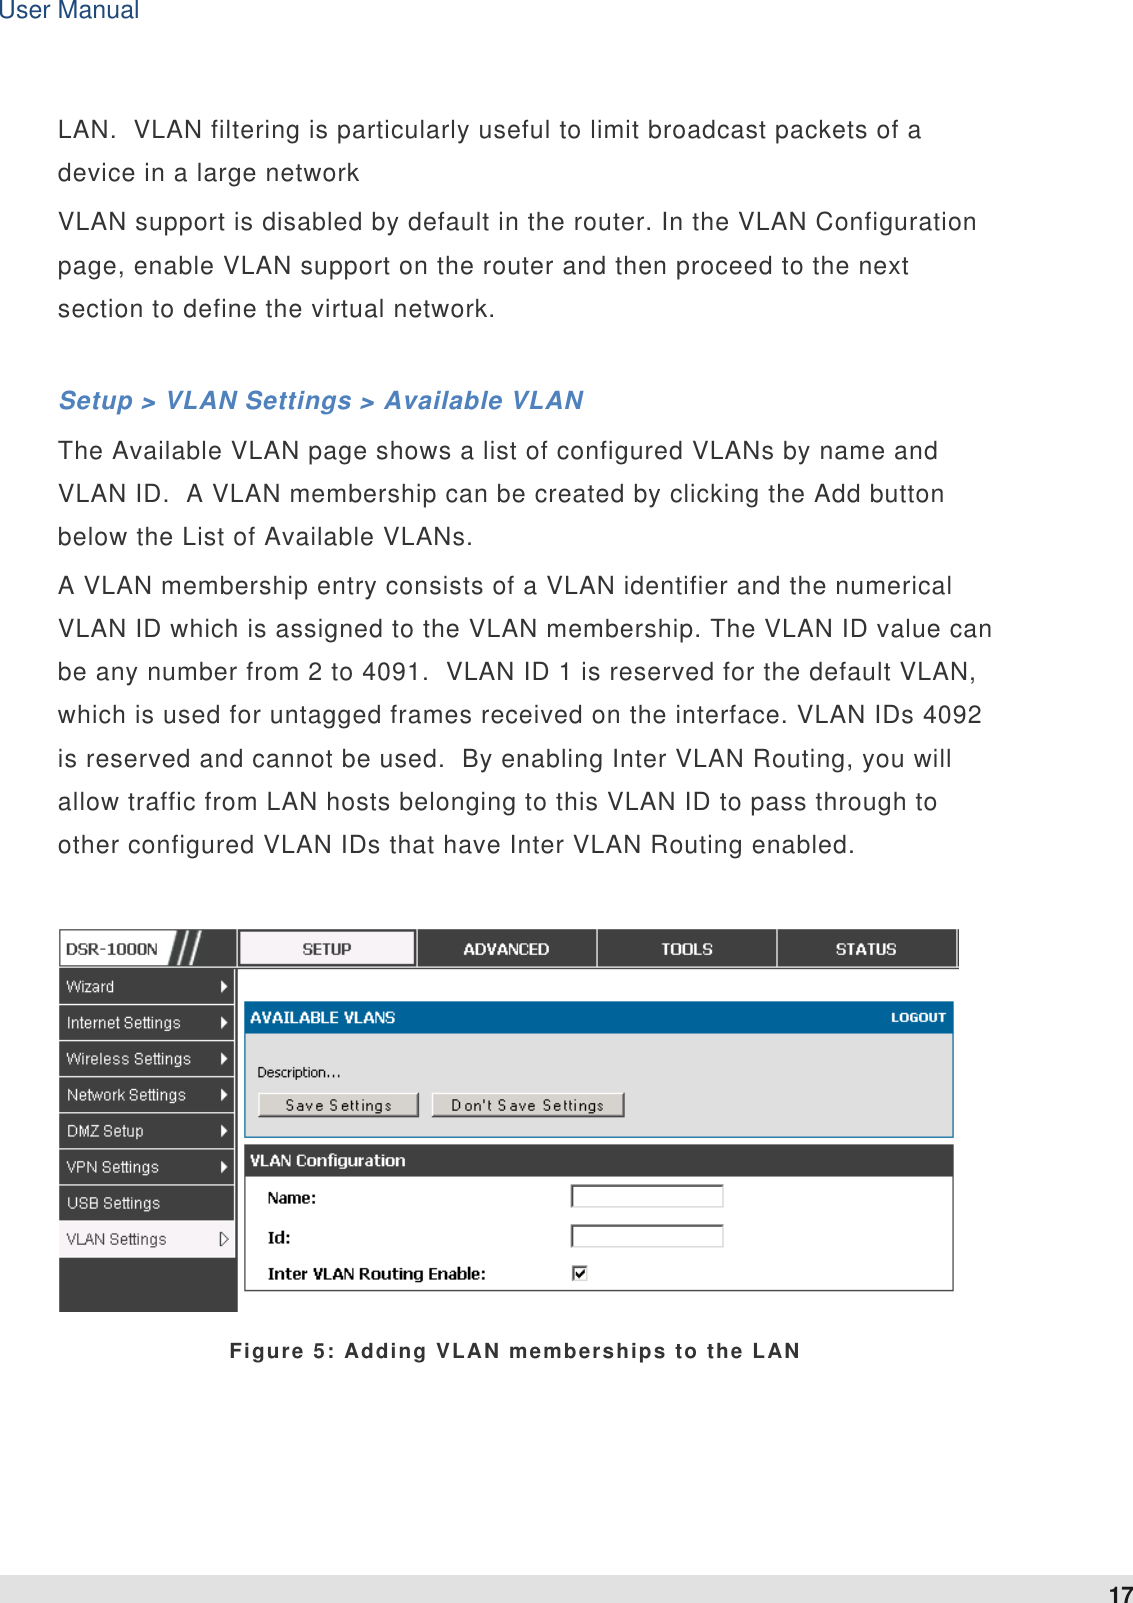 User Manual 17   LAN.  VLAN filtering is particularly useful to limit broadcast packets of a device in a large network VLAN support is disabled by default in the router. In the VLAN Configuration page, enable VLAN support on the router and then proceed to the next section to define the virtual network.  Setup &gt; VLAN Settings &gt; Available VLAN  The Available VLAN page shows a list of configured VLANs by name and VLAN ID.  A VLAN membership can be created by clicking the Add button below the List of Available VLANs.  A VLAN membership entry consists of a VLAN identifier and the numerical VLAN ID which is assigned to the VLAN membership. The VLAN ID value can be any number from 2 to 4091.  VLAN ID 1 is reserved for the default VLAN, which is used for untagged frames received on the interface. VLAN IDs 4092 is reserved and cannot be used.  By enabling Inter VLAN Routing, you will allow traffic from LAN hosts belonging to this VLAN ID to pass through to other configured VLAN IDs that have Inter VLAN Routing enabled.    Figure 5: Adding VLAN memberships to the LAN  